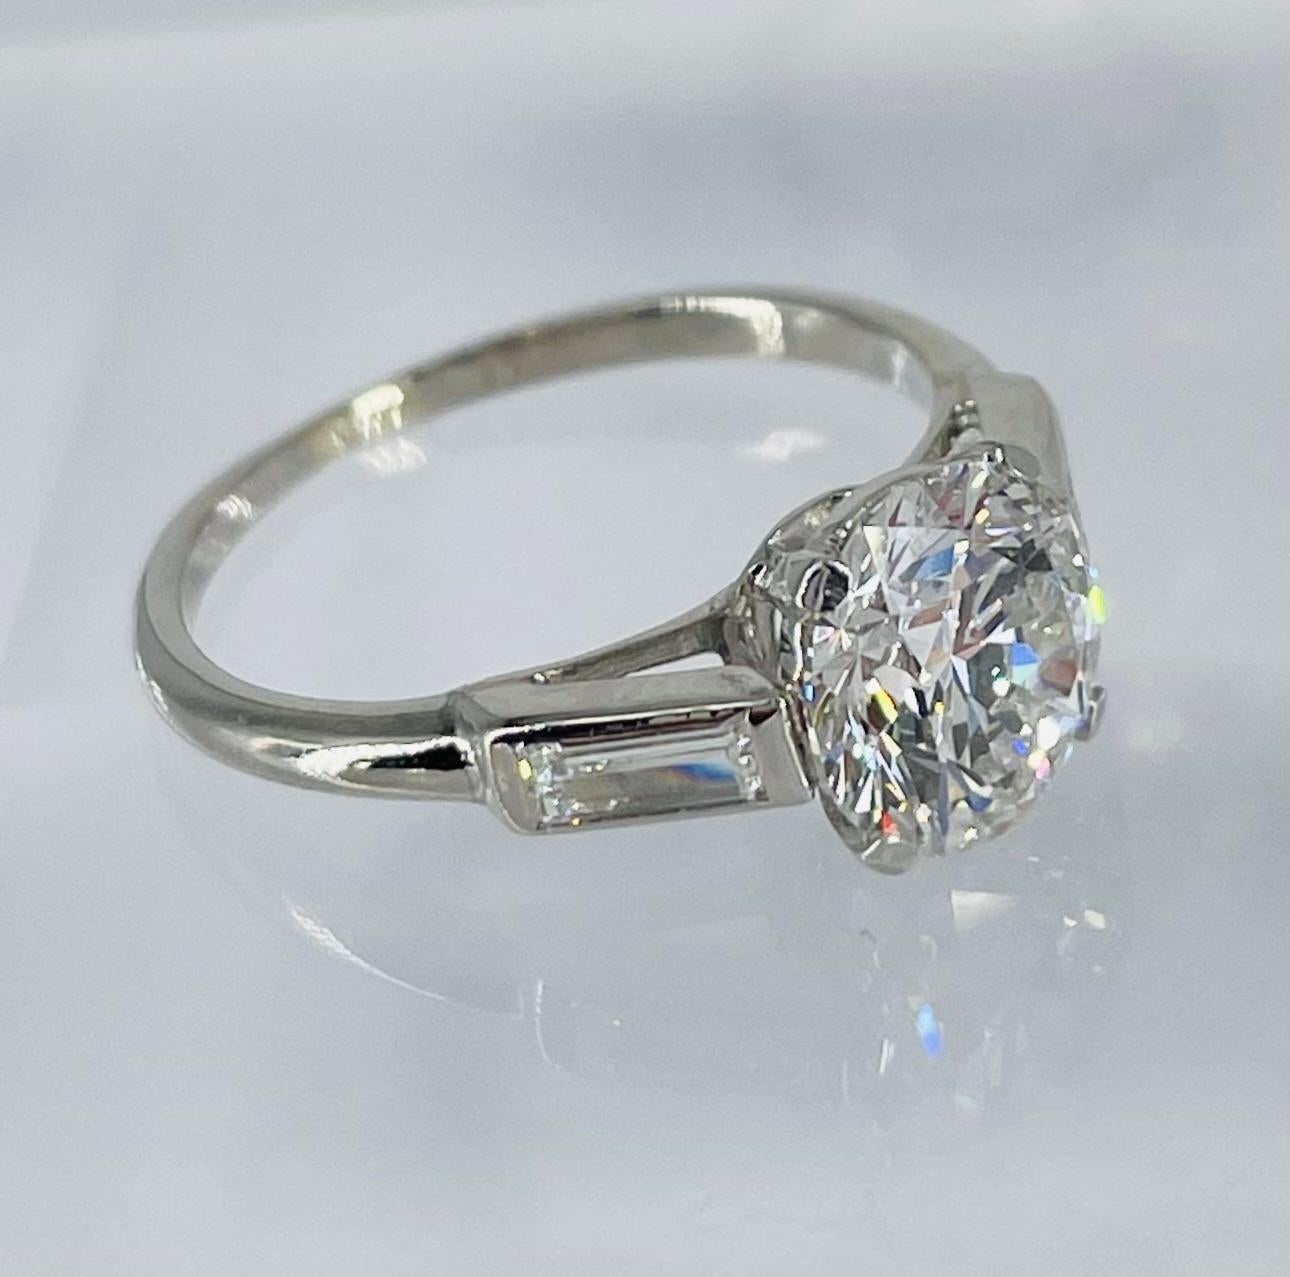 An exquisite piece by Cartier, this engagement ring features a 1.57 carat round diamond certified by GIA as F color and VS1 clarity. The setting is crafted in platinum with Cartier's signature details: charming tab prongs, bezel set side stones, and